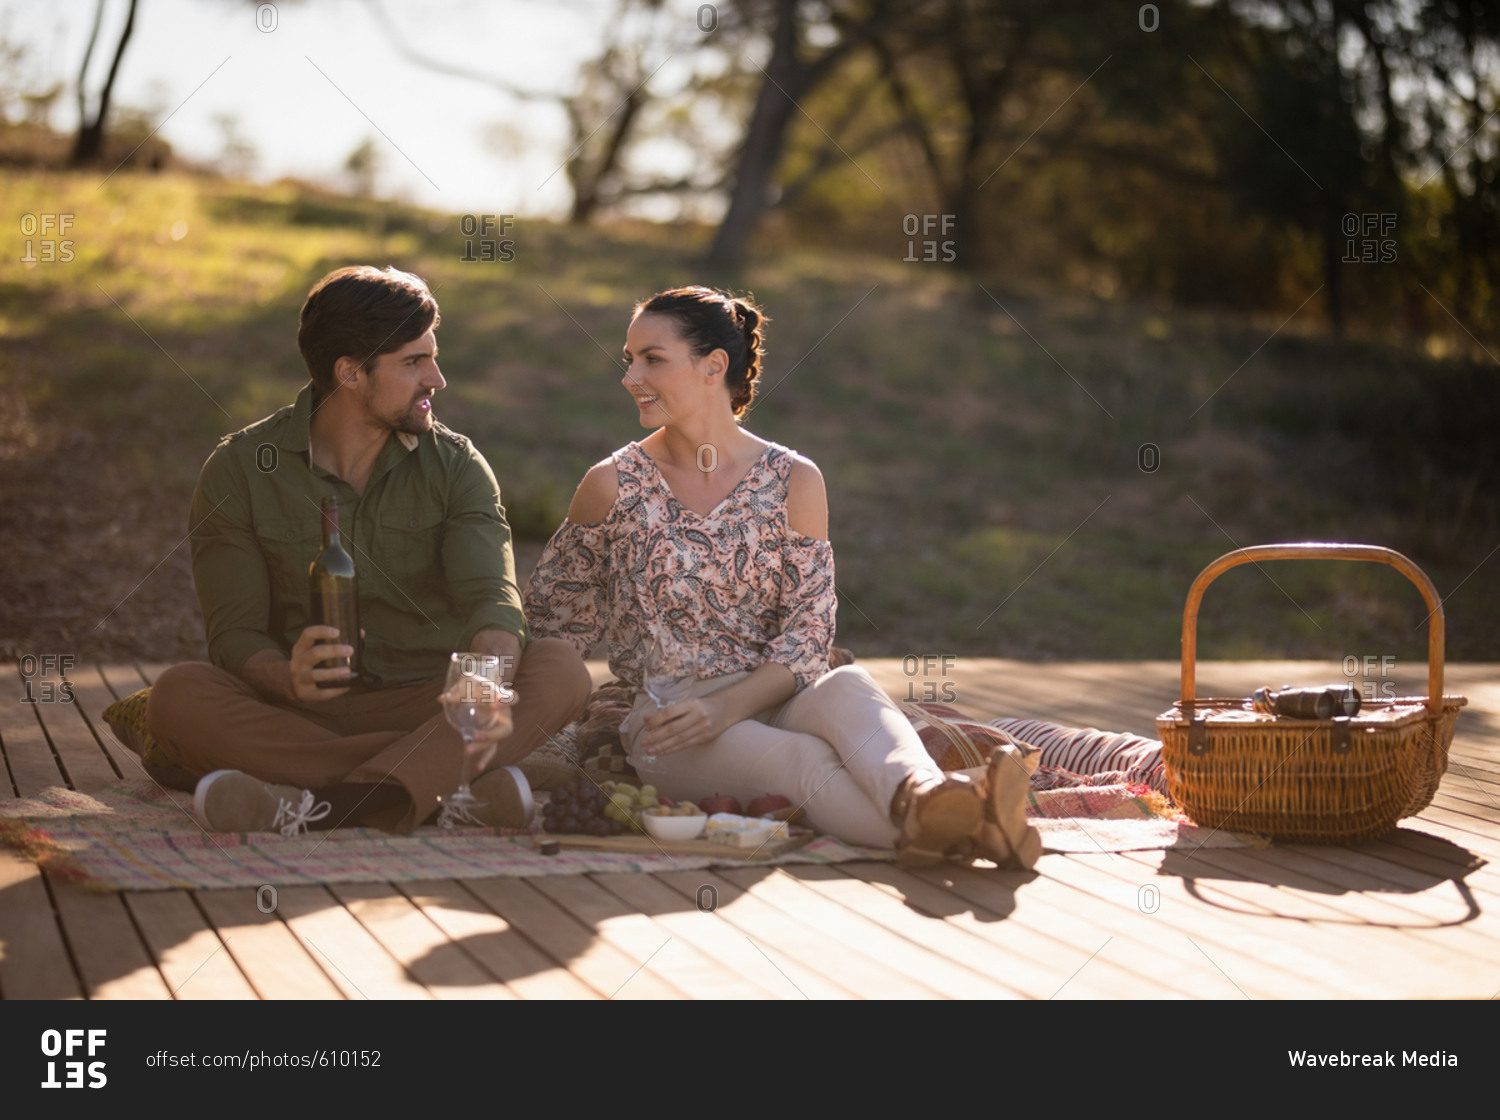 Couple having drinks together on wooden plank during safari vacation